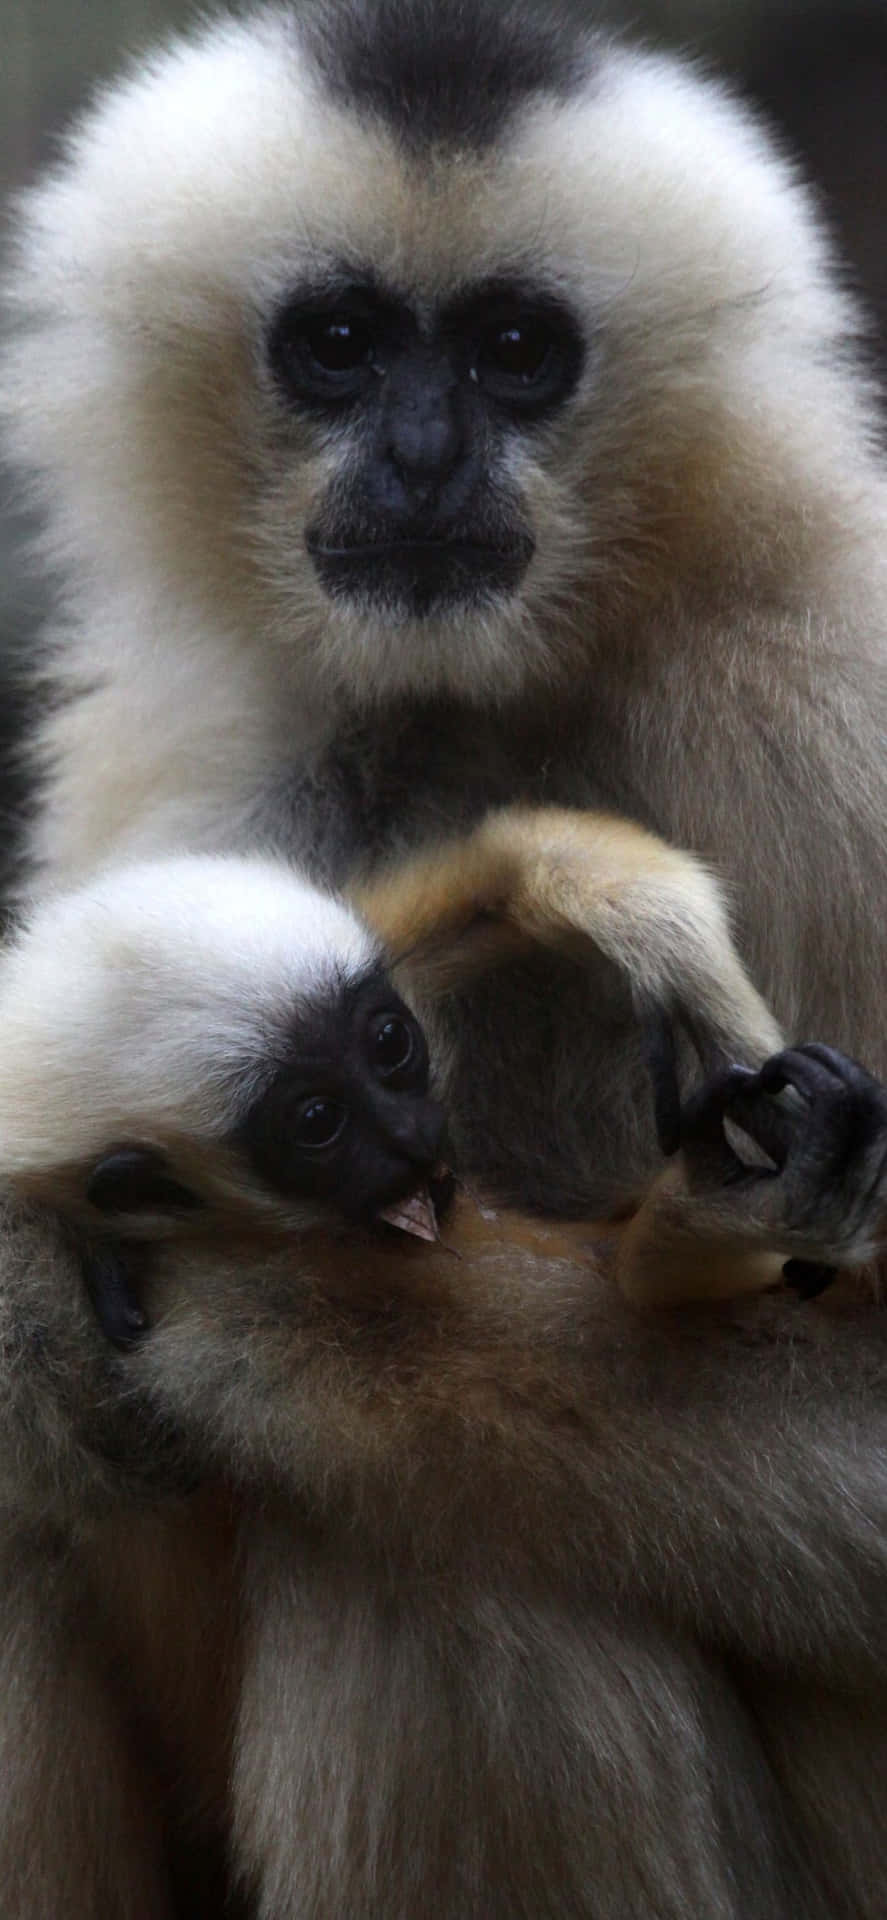 A Baby Monkey Is Holding Its Mother